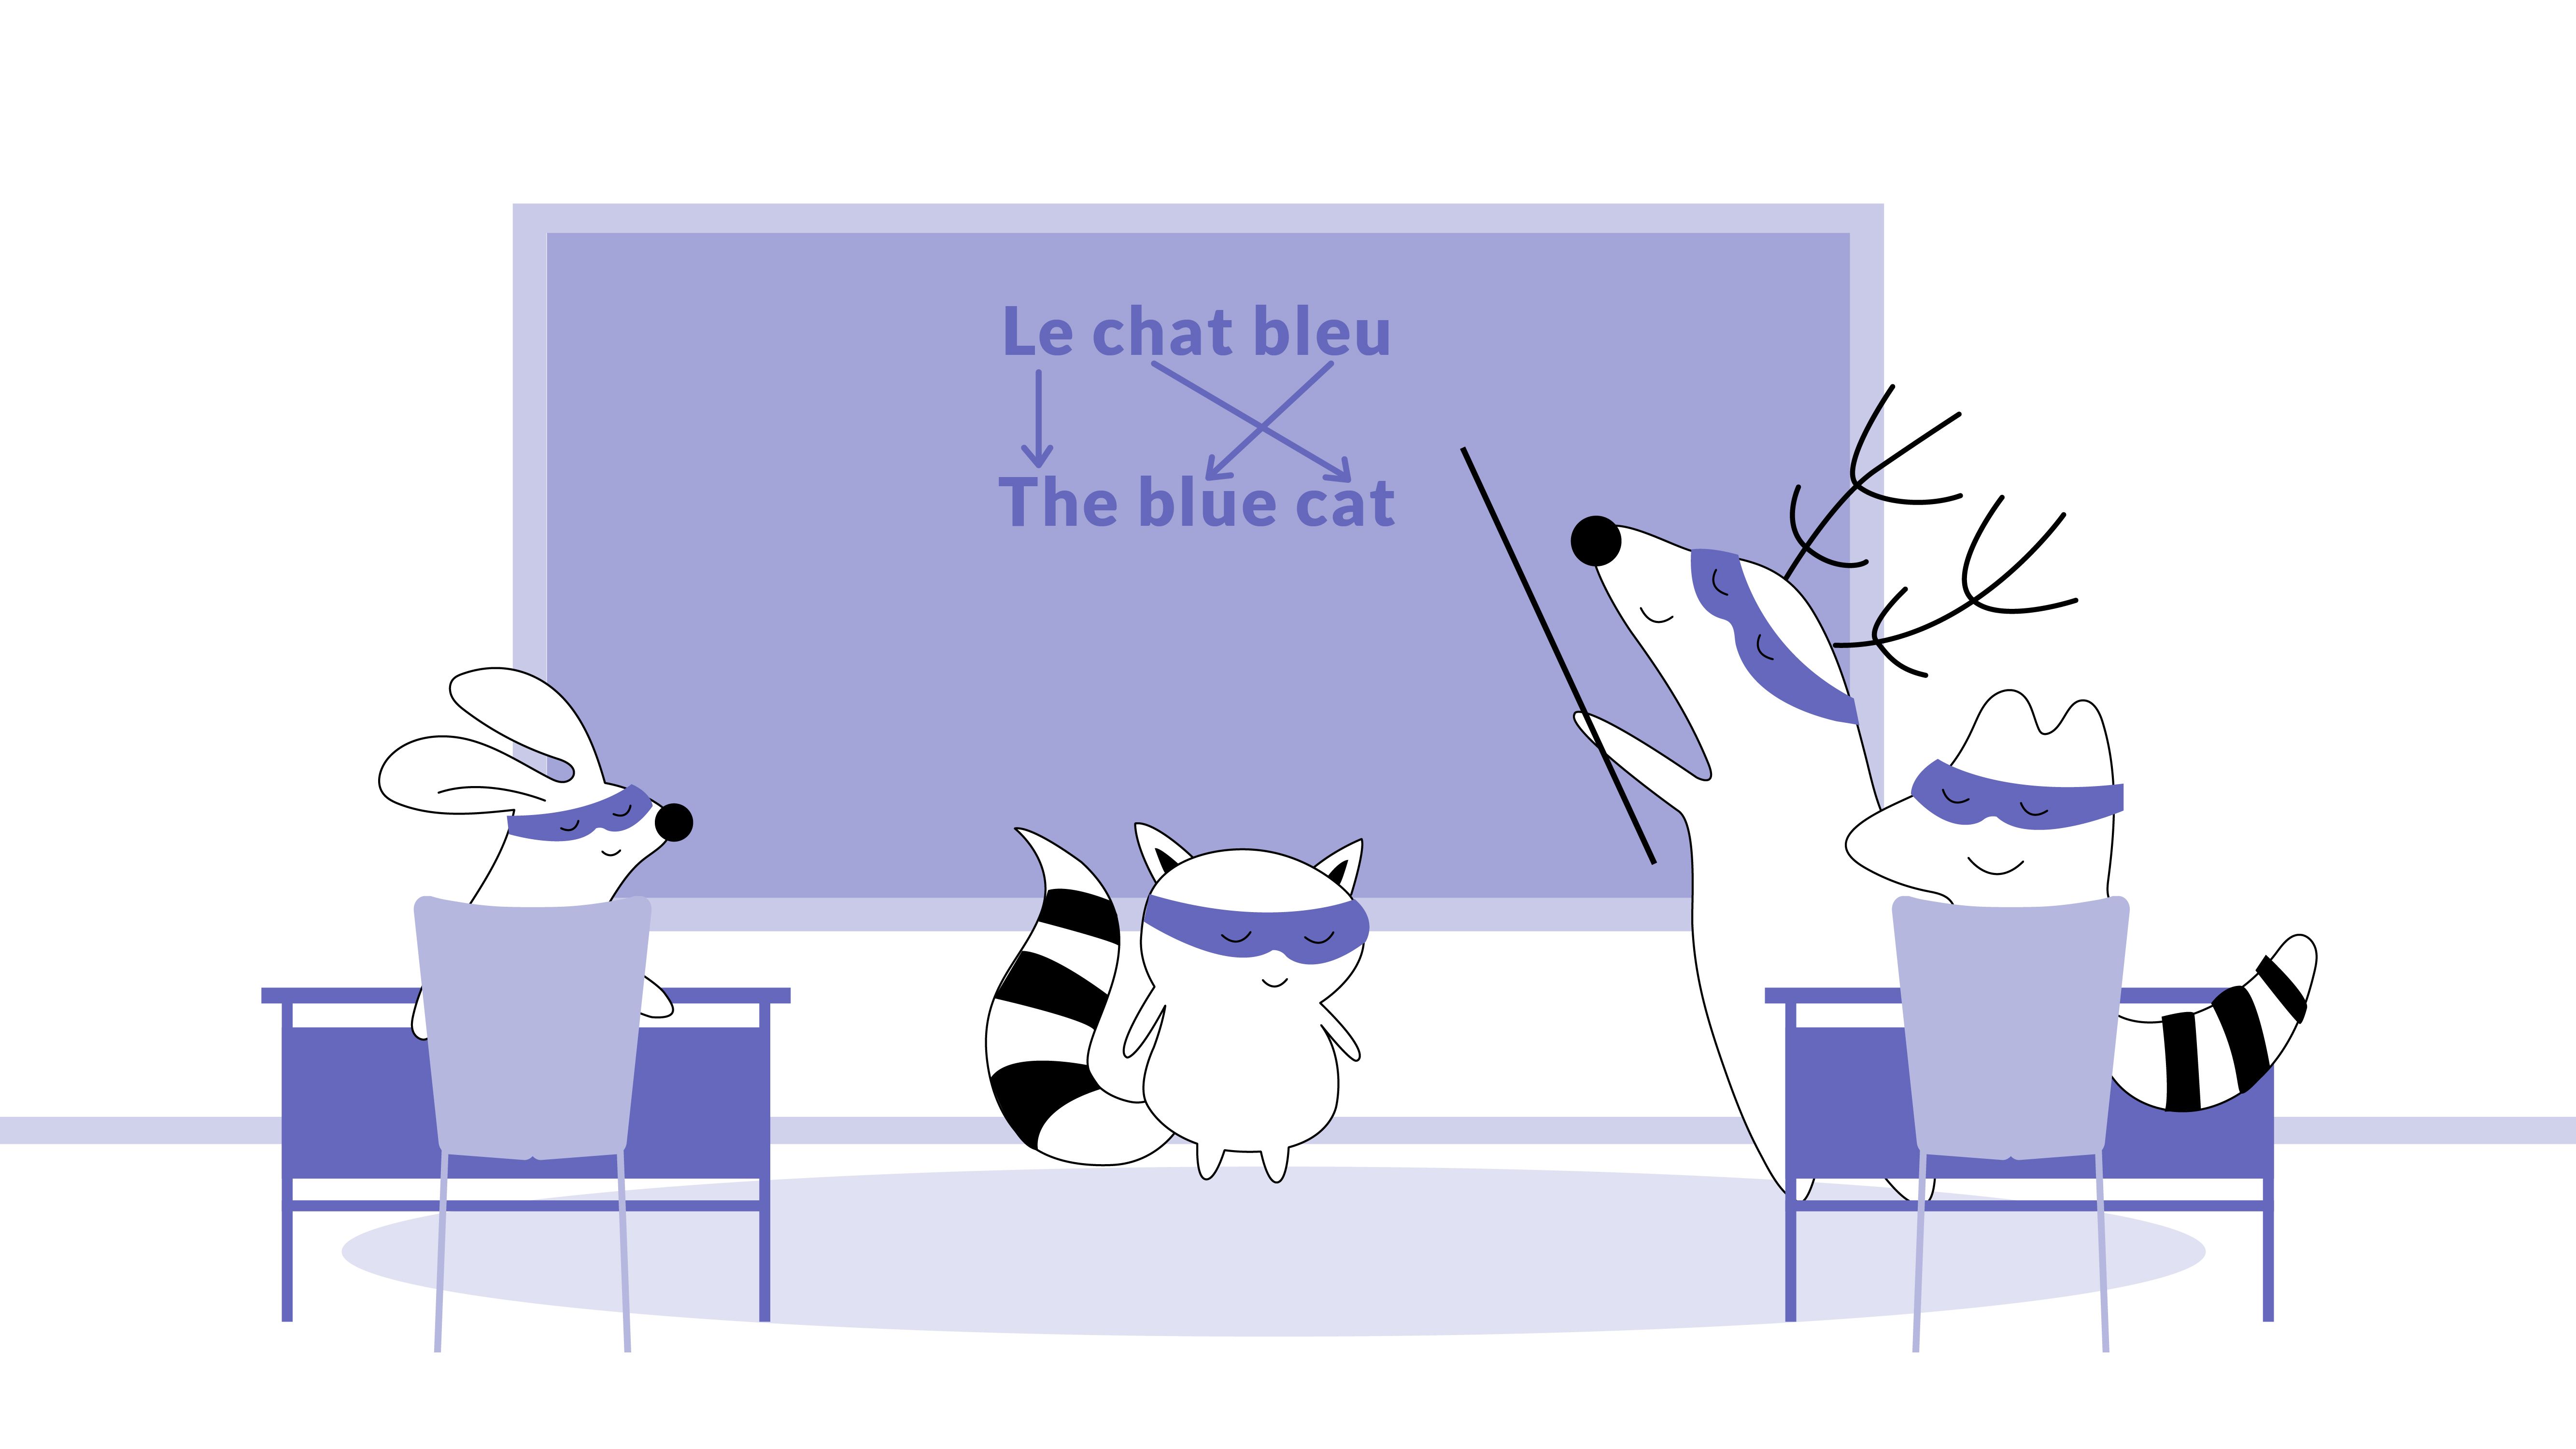 Benji standing at a chalkboard. “Le chat bleu” is written on top, and “the blue cat” is written underneath it.